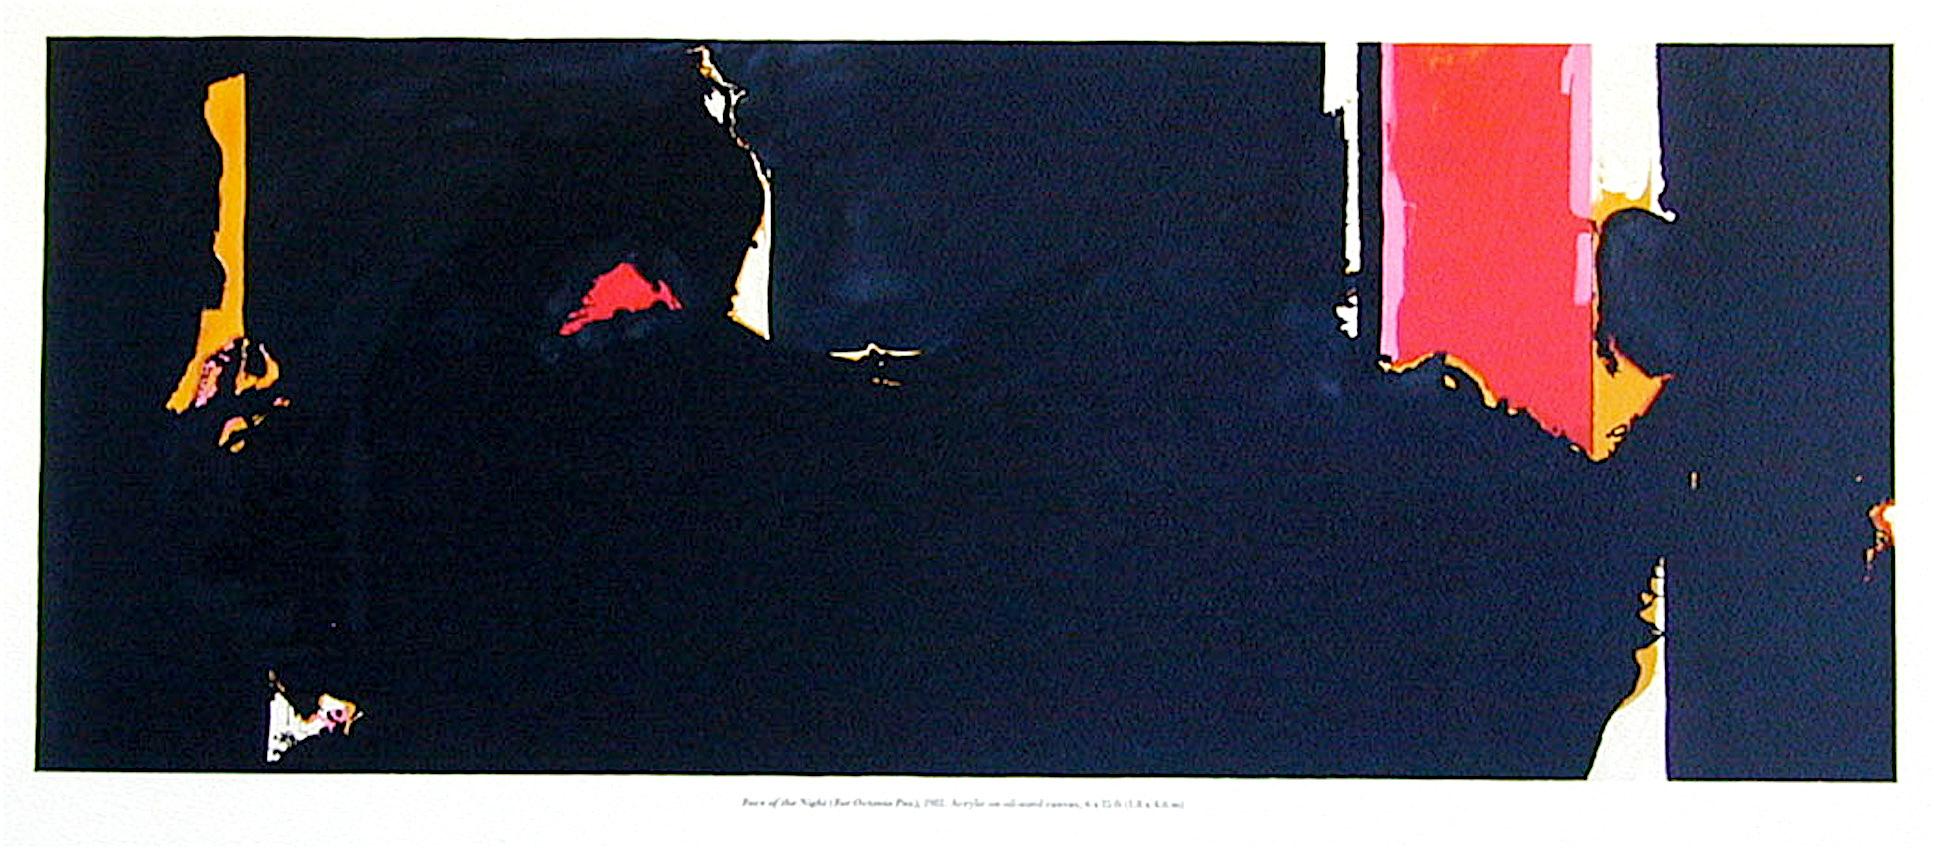 FACE OF THE NIGHT(Octavio Paz)Lithograph on Arches Paper, Abstract Expressionist - Print by (after) Robert Motherwell